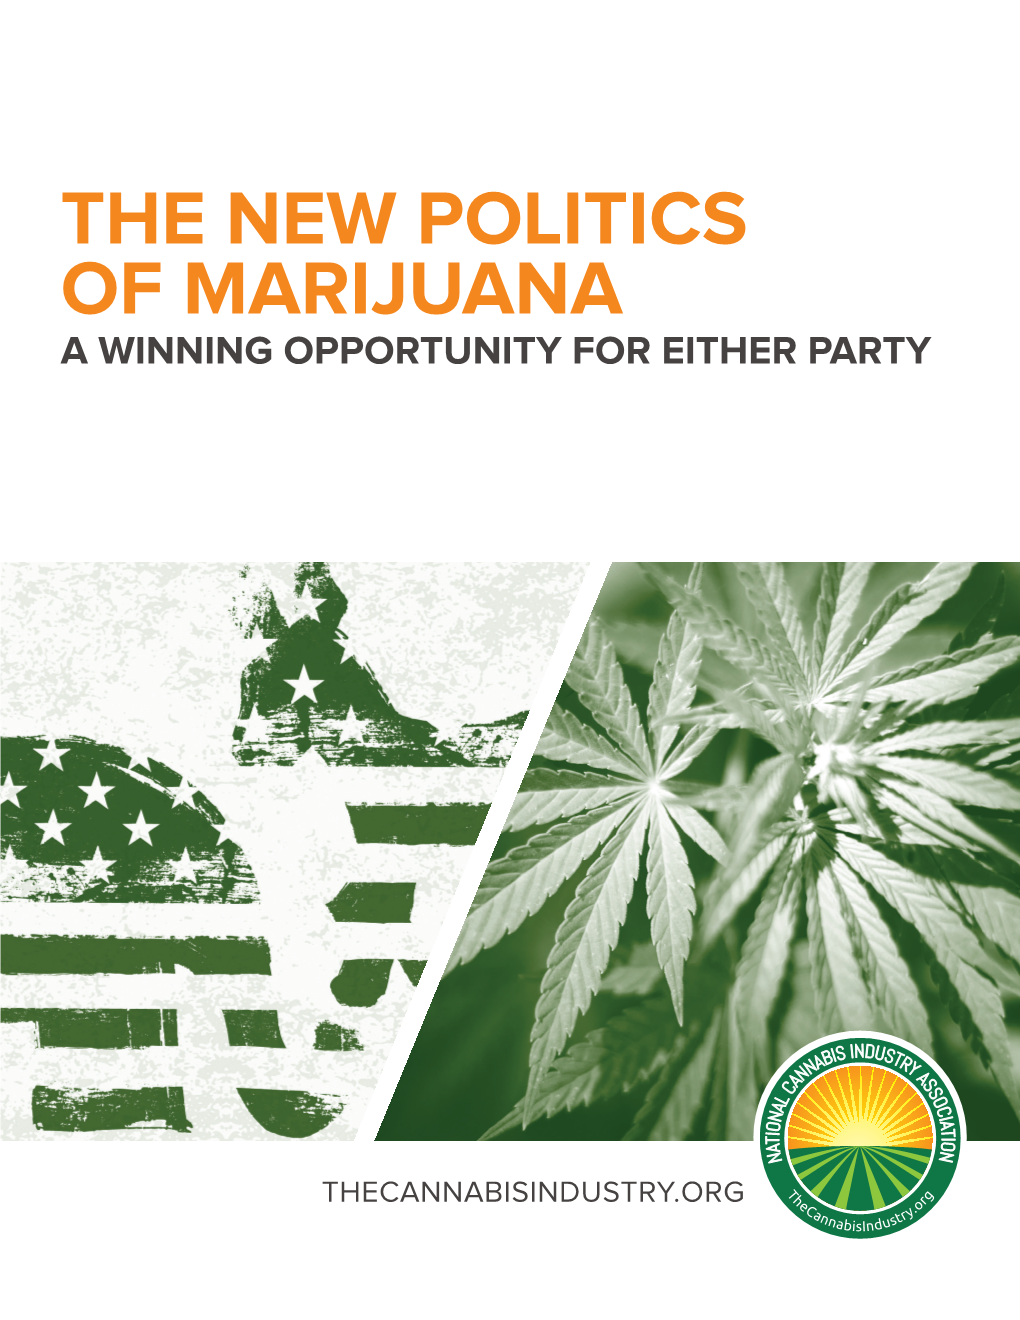 The New Politics of Marijuana a Winning Opportunity for Either Party